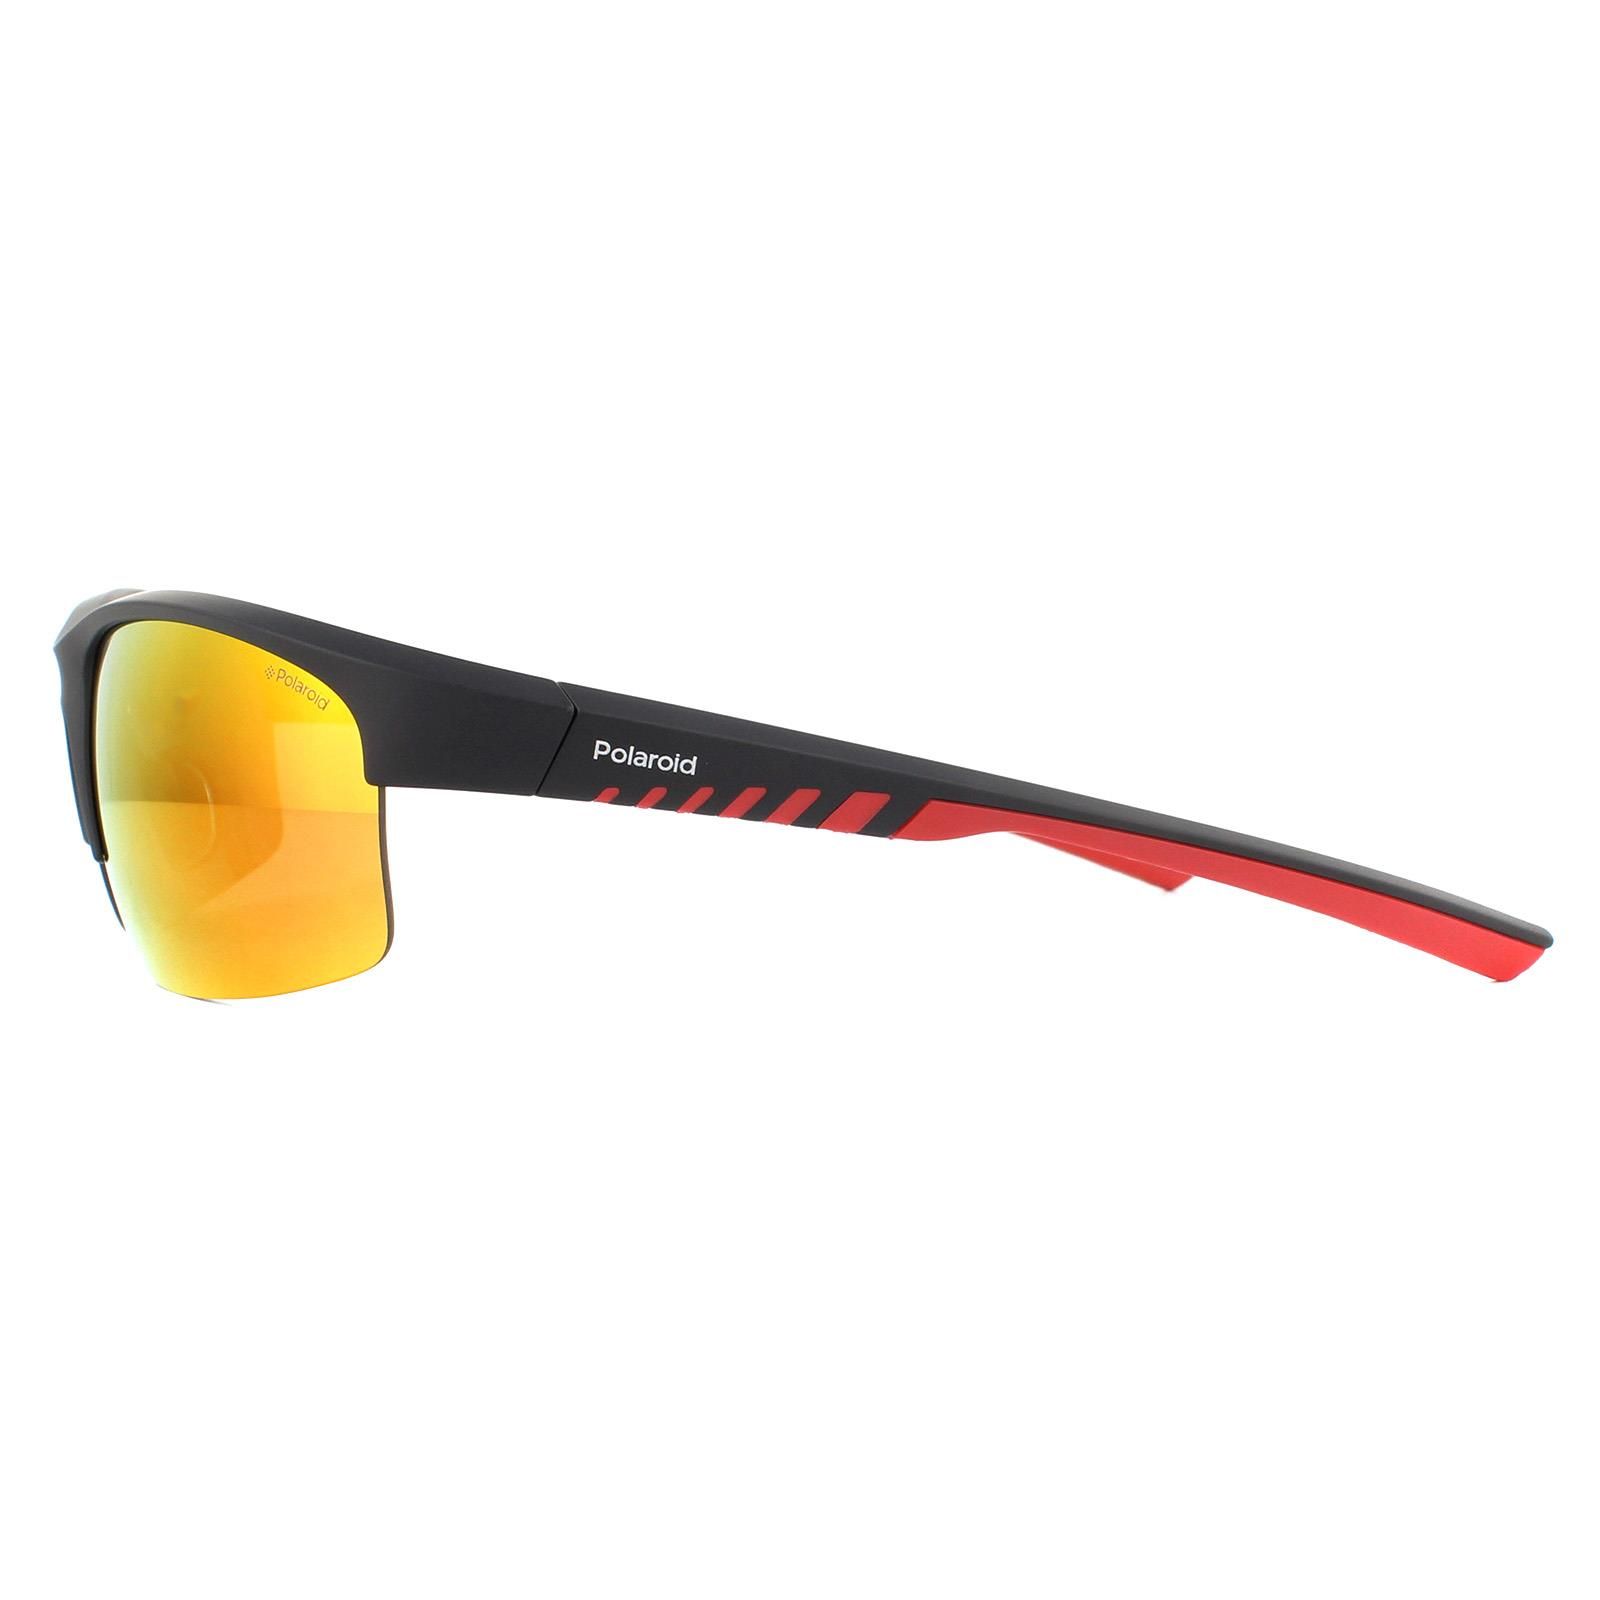 Polaroid Sport Sunglasses PLD 7018/N/S OIT OZ Black Red Red Mirror Polarized have a plastic frame in a semi rimless sport style and are designed for men. Polaroid's polarized lenses give superb glare protection for a fantastic price.